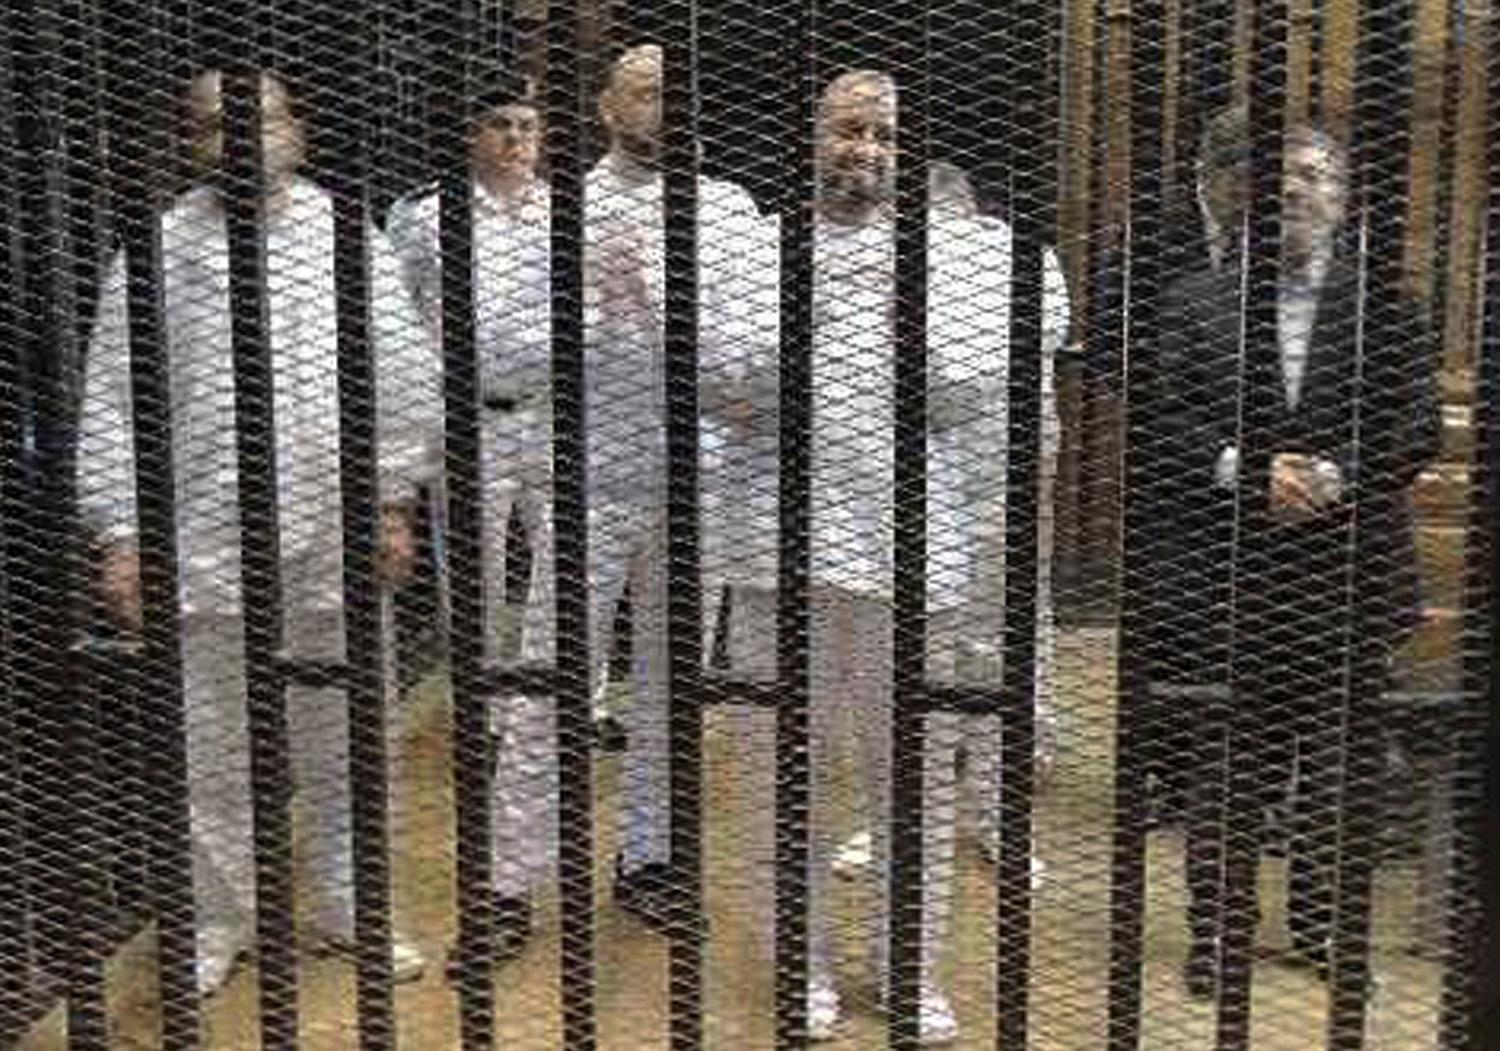 Egypt's Mohammed Morsi  and others in court